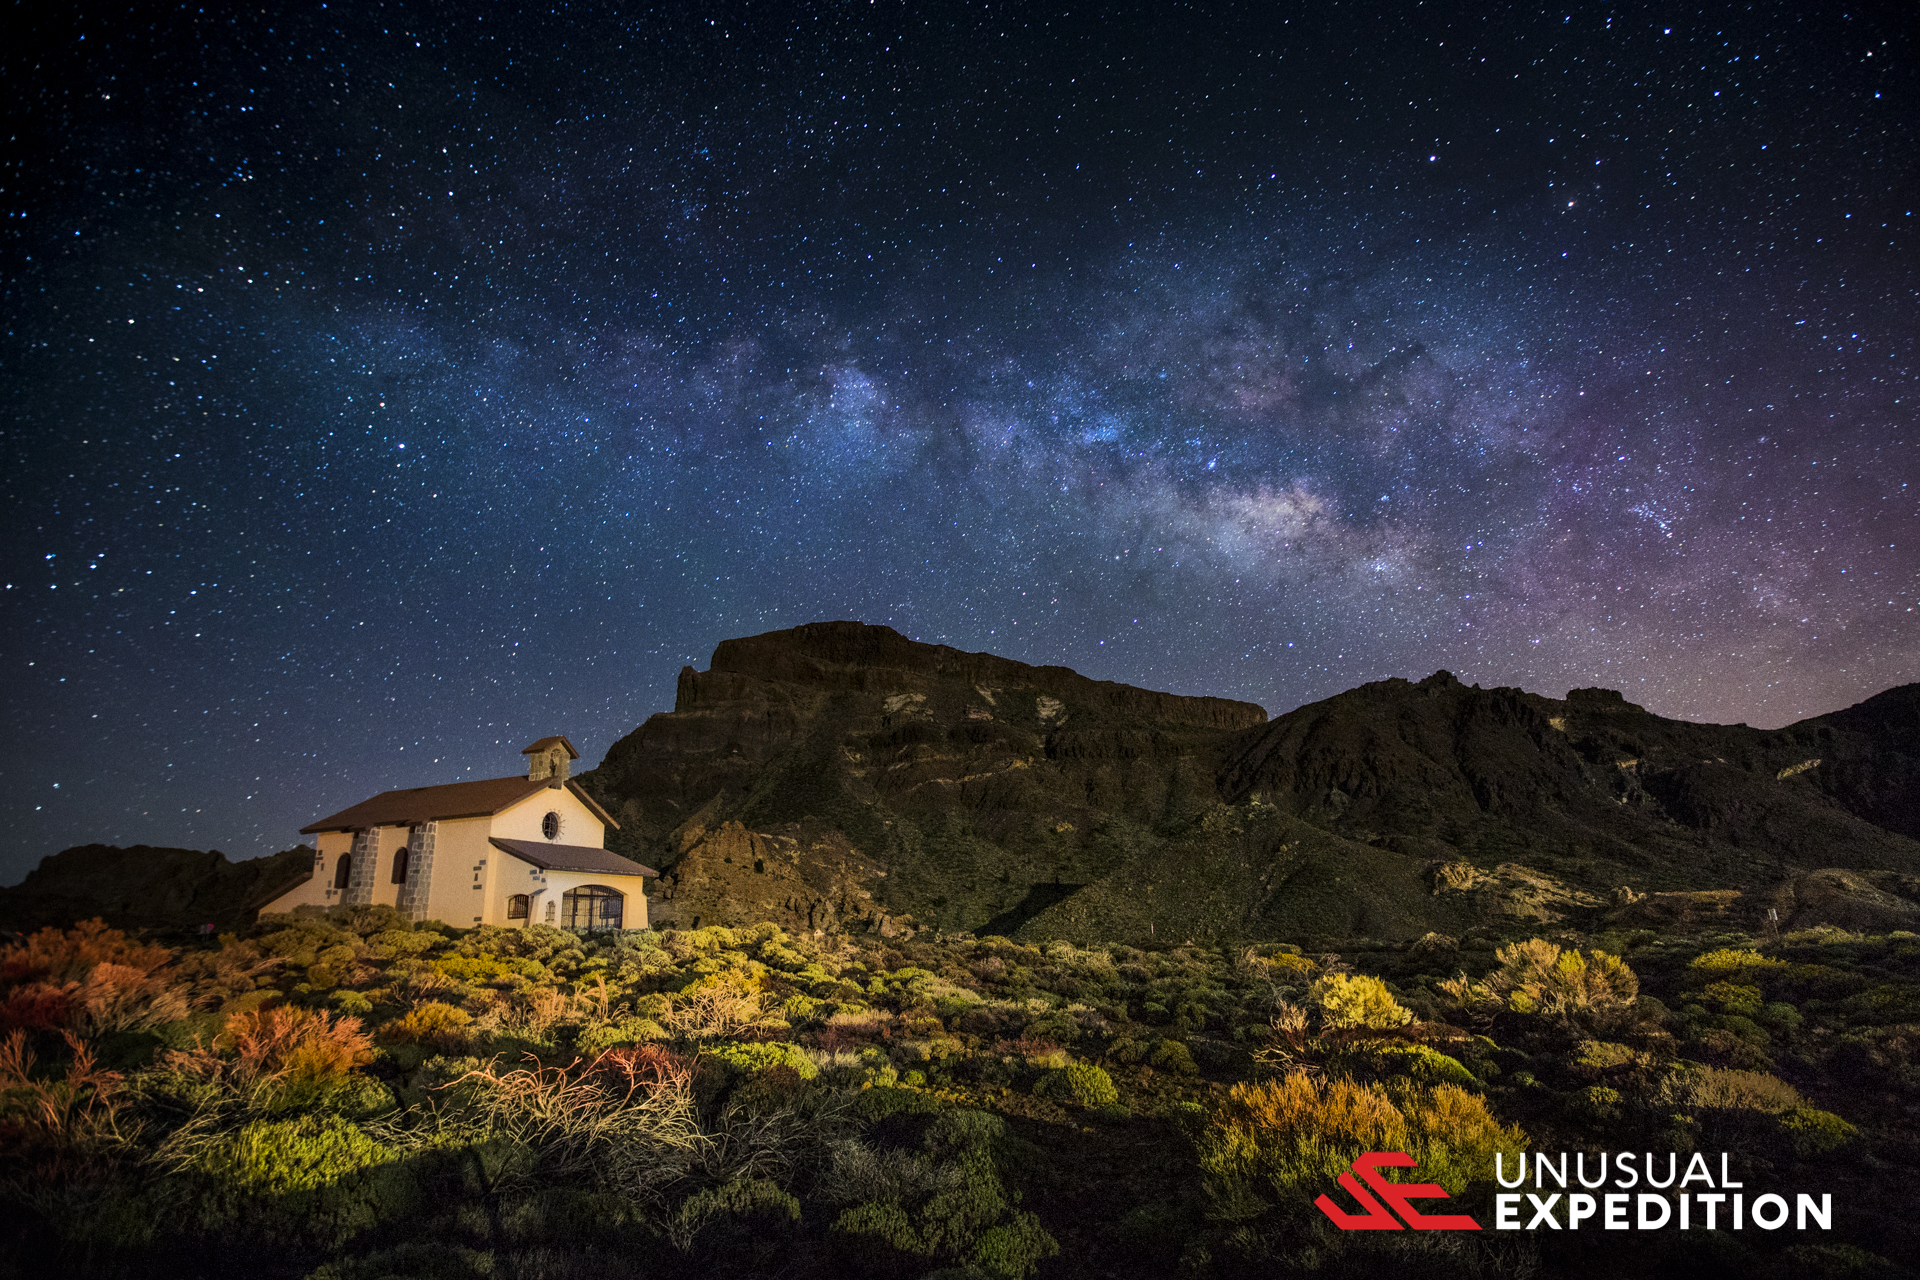 5 Unusual Locations for Milky Way Photography